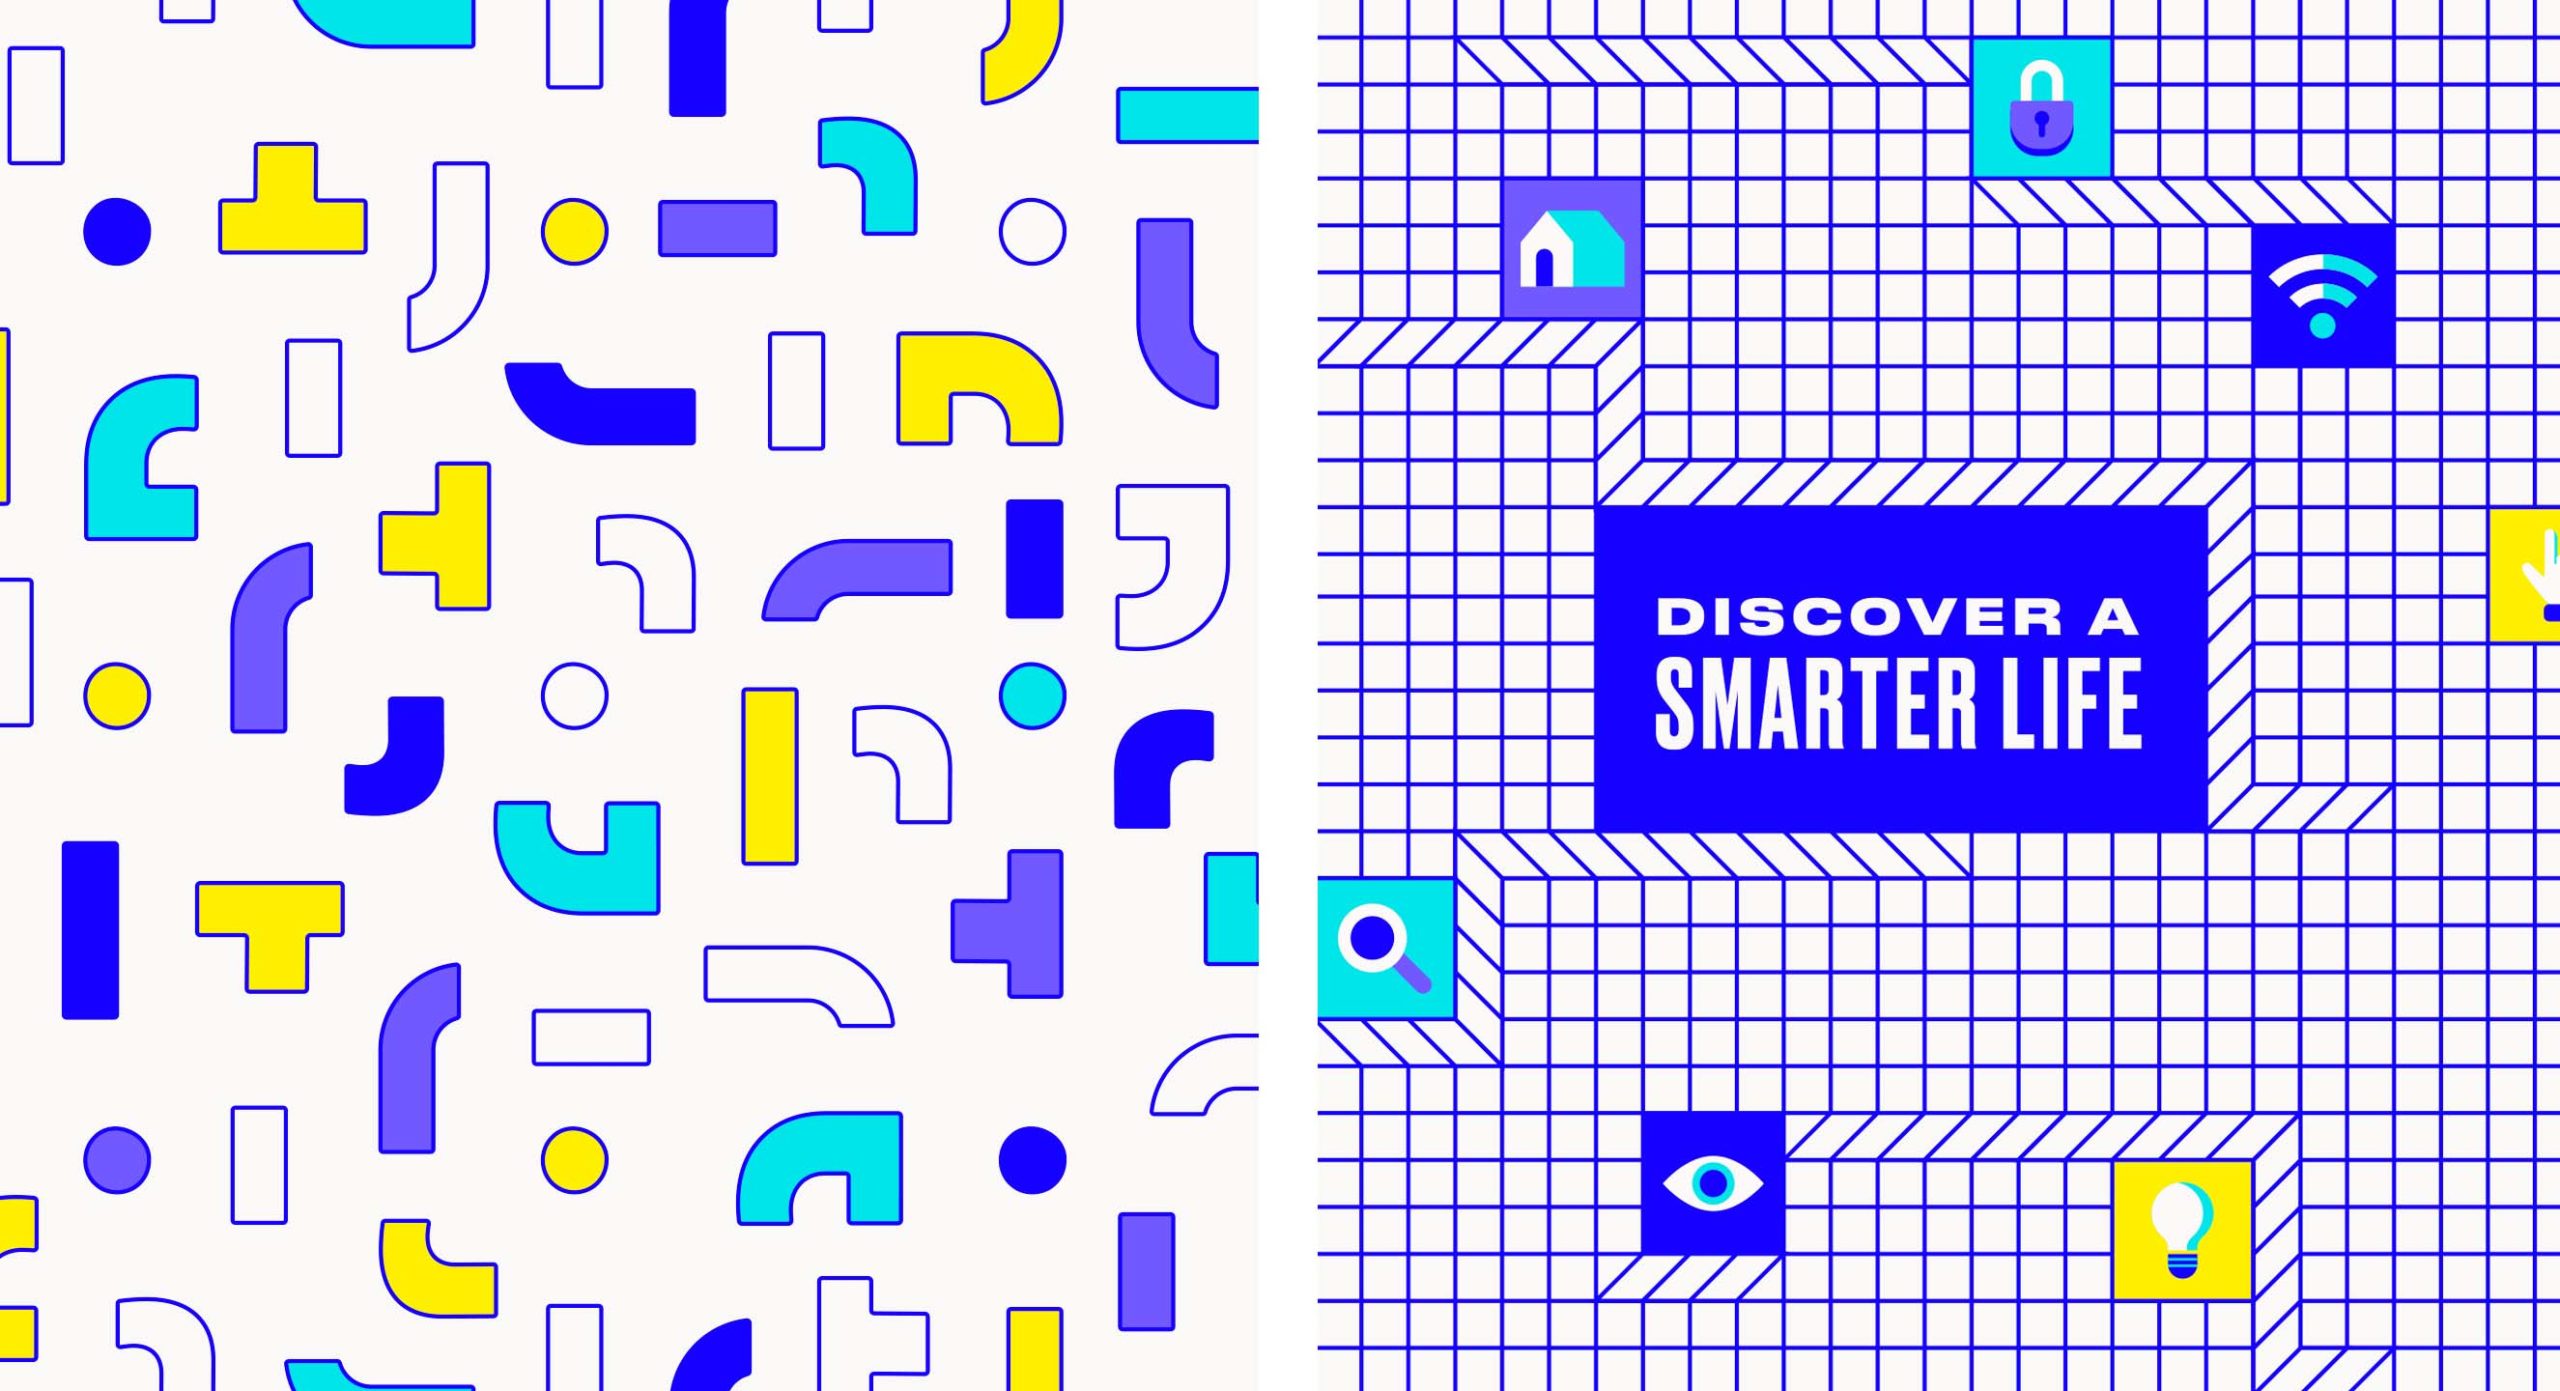 Fun and colorful geometric brand patterns for retail tech brand Nifty